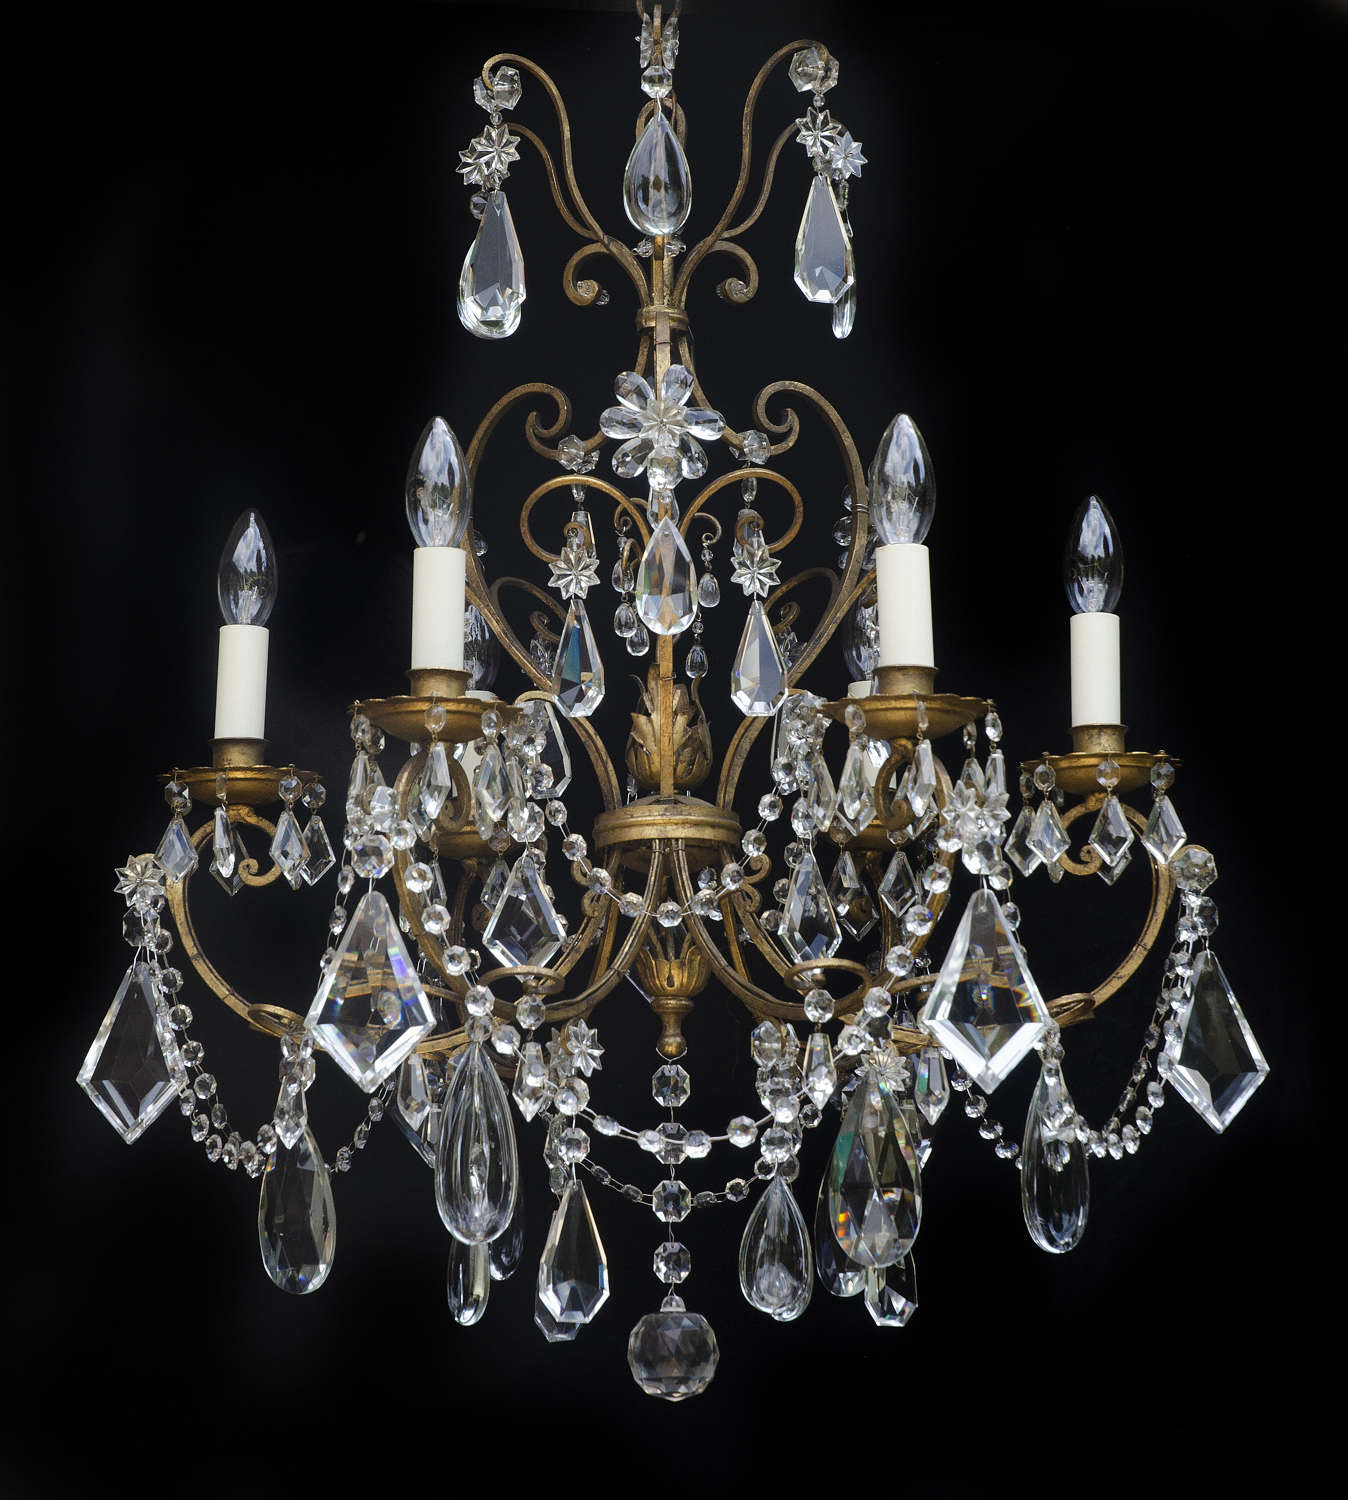 6 light Italian Florentine Antique Chandelier, with Crystal Flowers